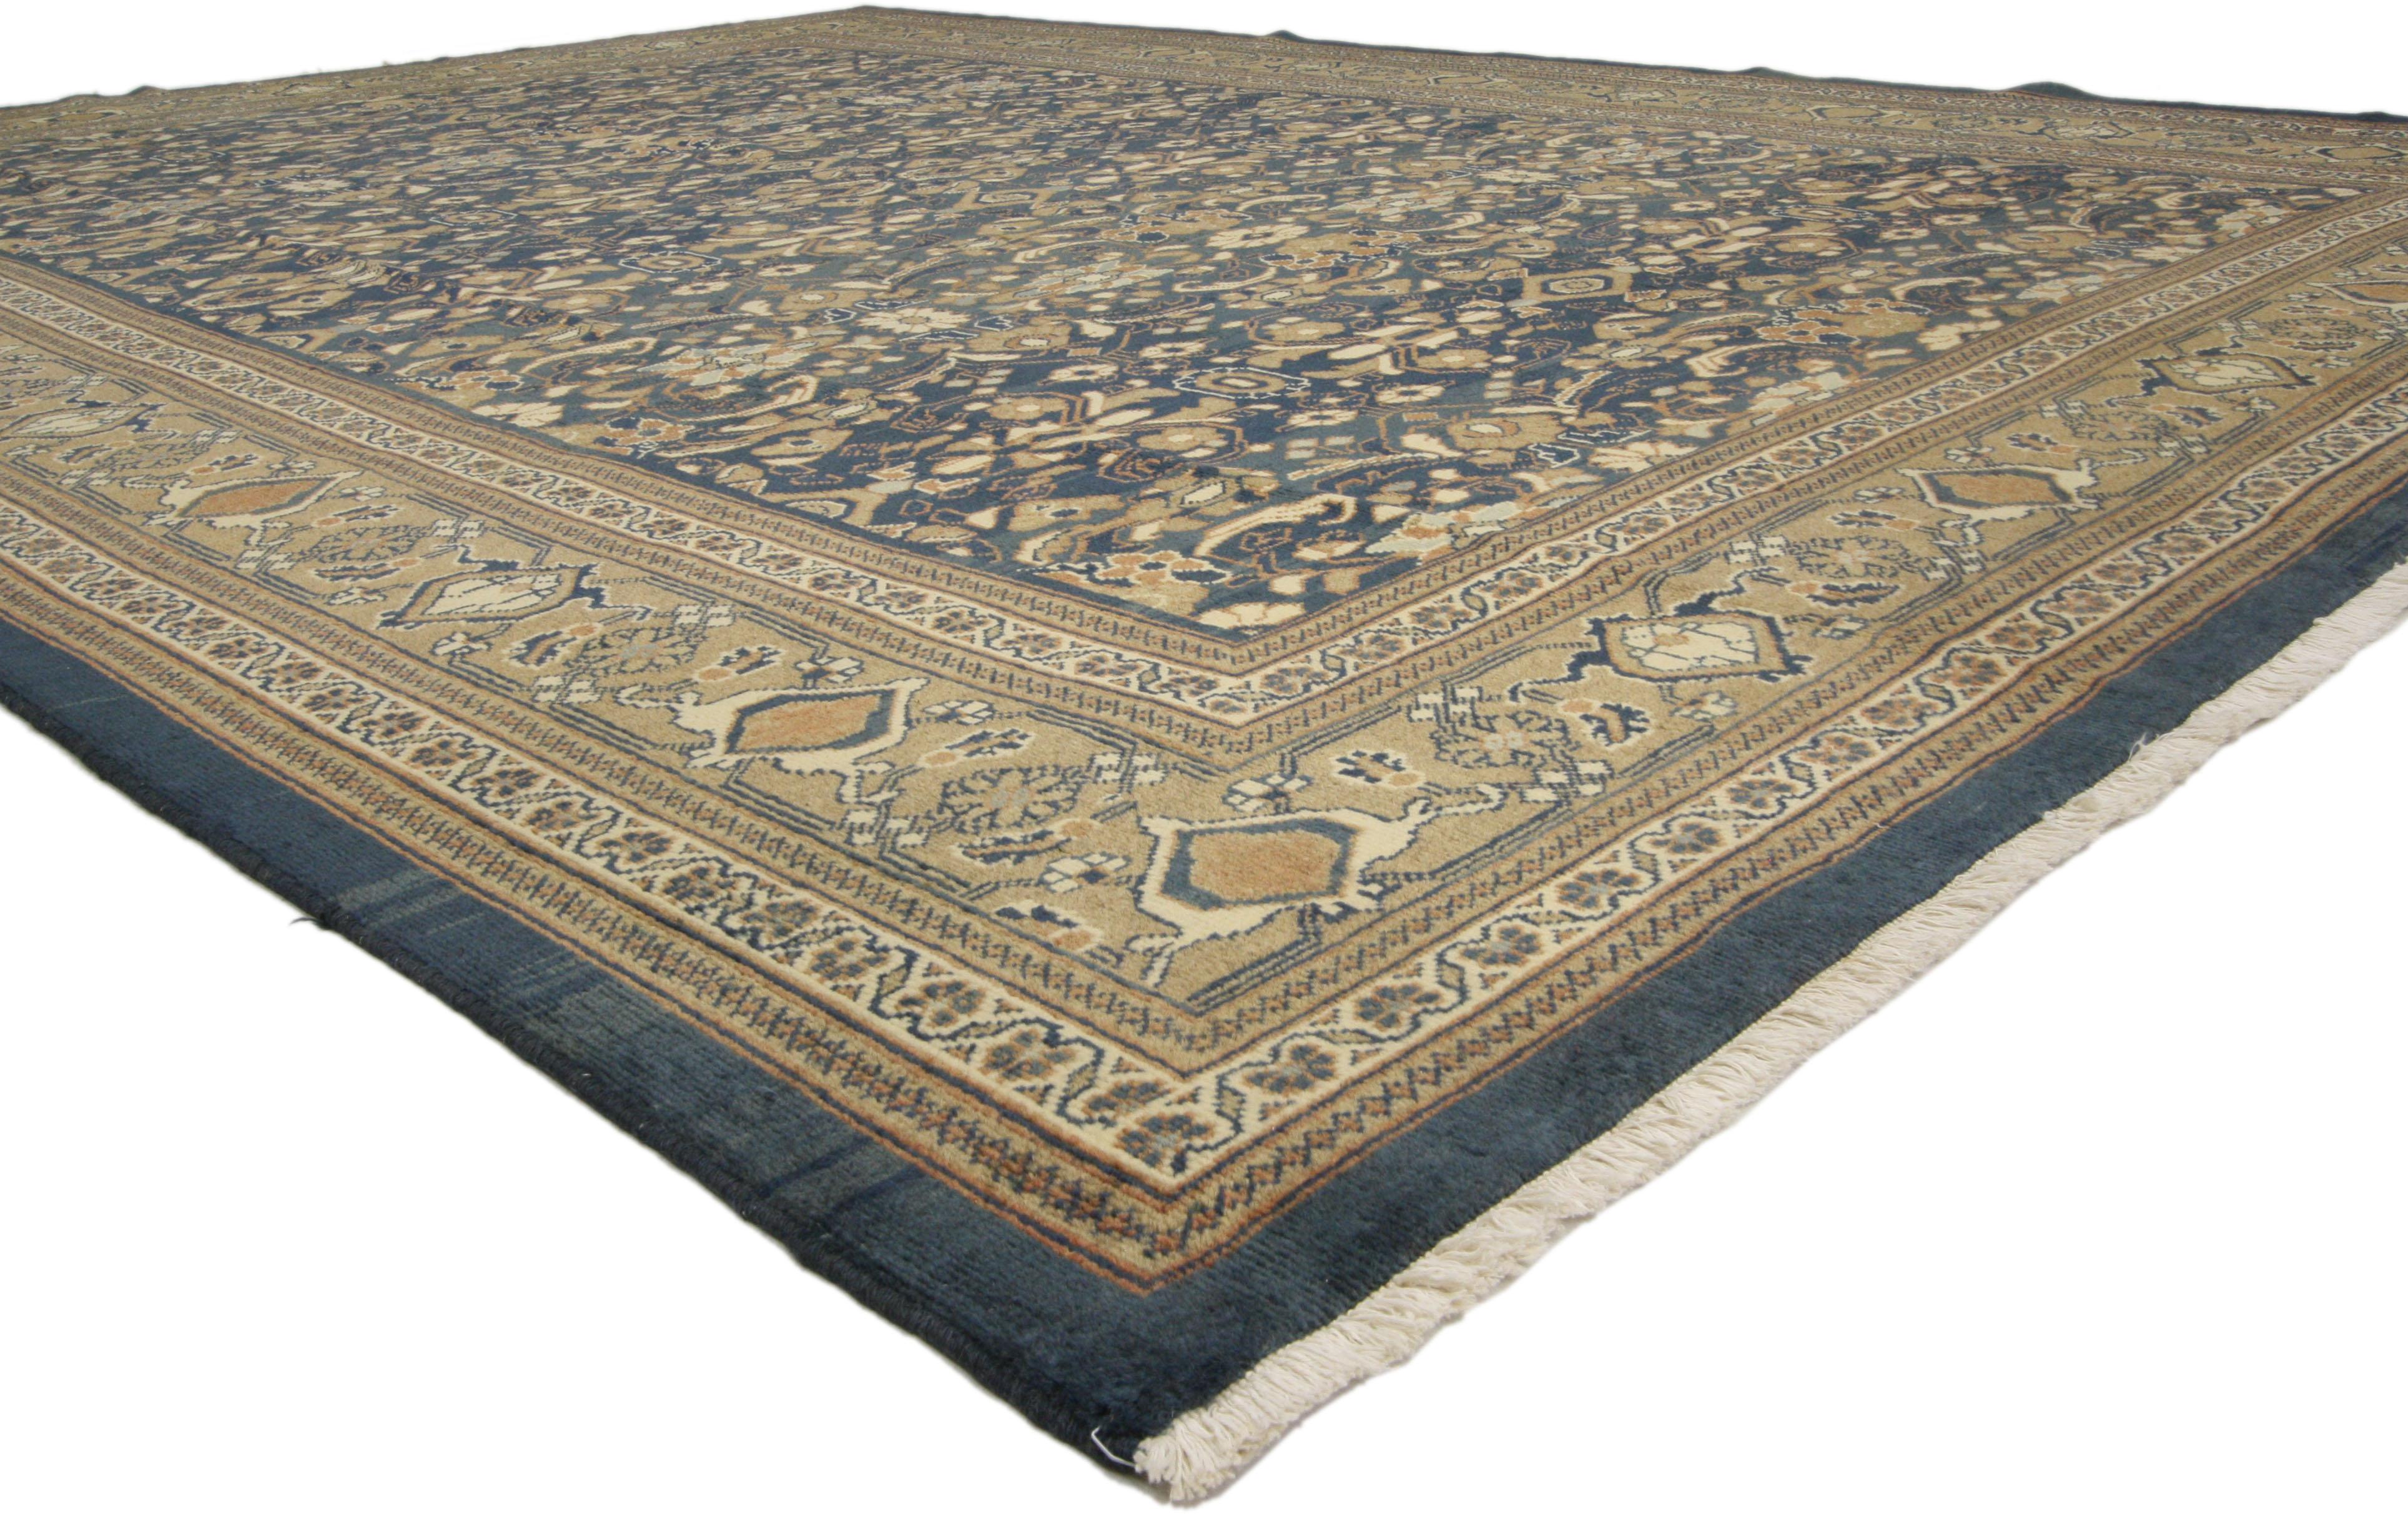 75838 Vintage Persian Mahal Area Rug with English Traditional Style 09'09 x 13'00. With classic architectural details adding timeless elegance and a sense of history, this hand knotted wool vintage Persian Mahal rug with traditional style features a